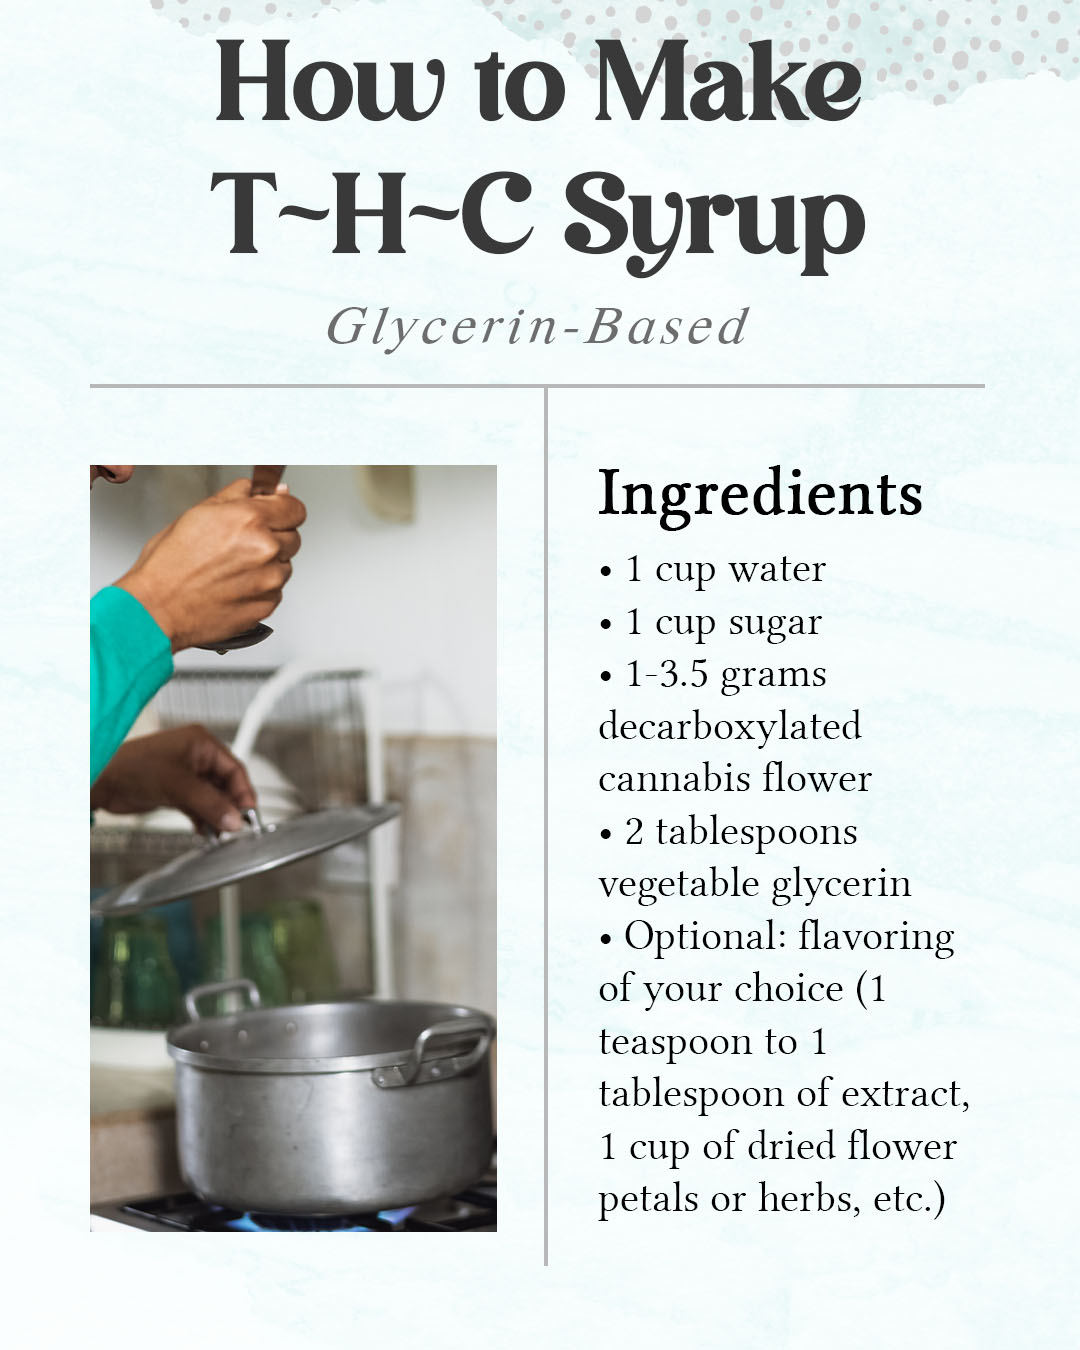 thc syrup ingredients_glycerin